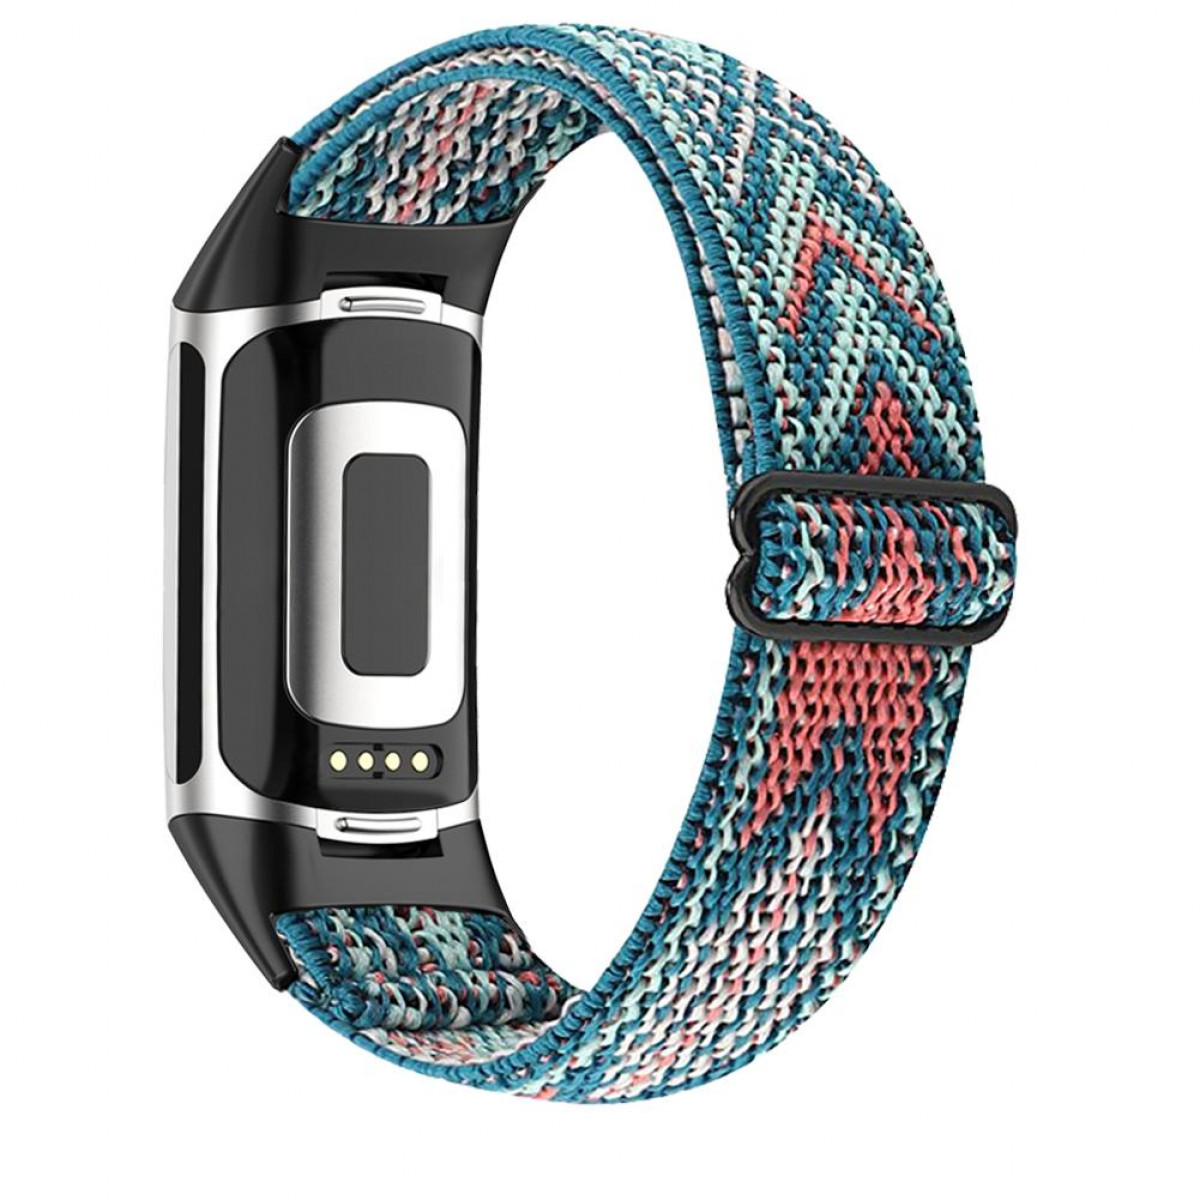 INF Fitbit 5, Flechtmuster Charge 5 Armband Ersatzarmband, / Charge mit / Orange Fitbit, Blau Orange, Blau